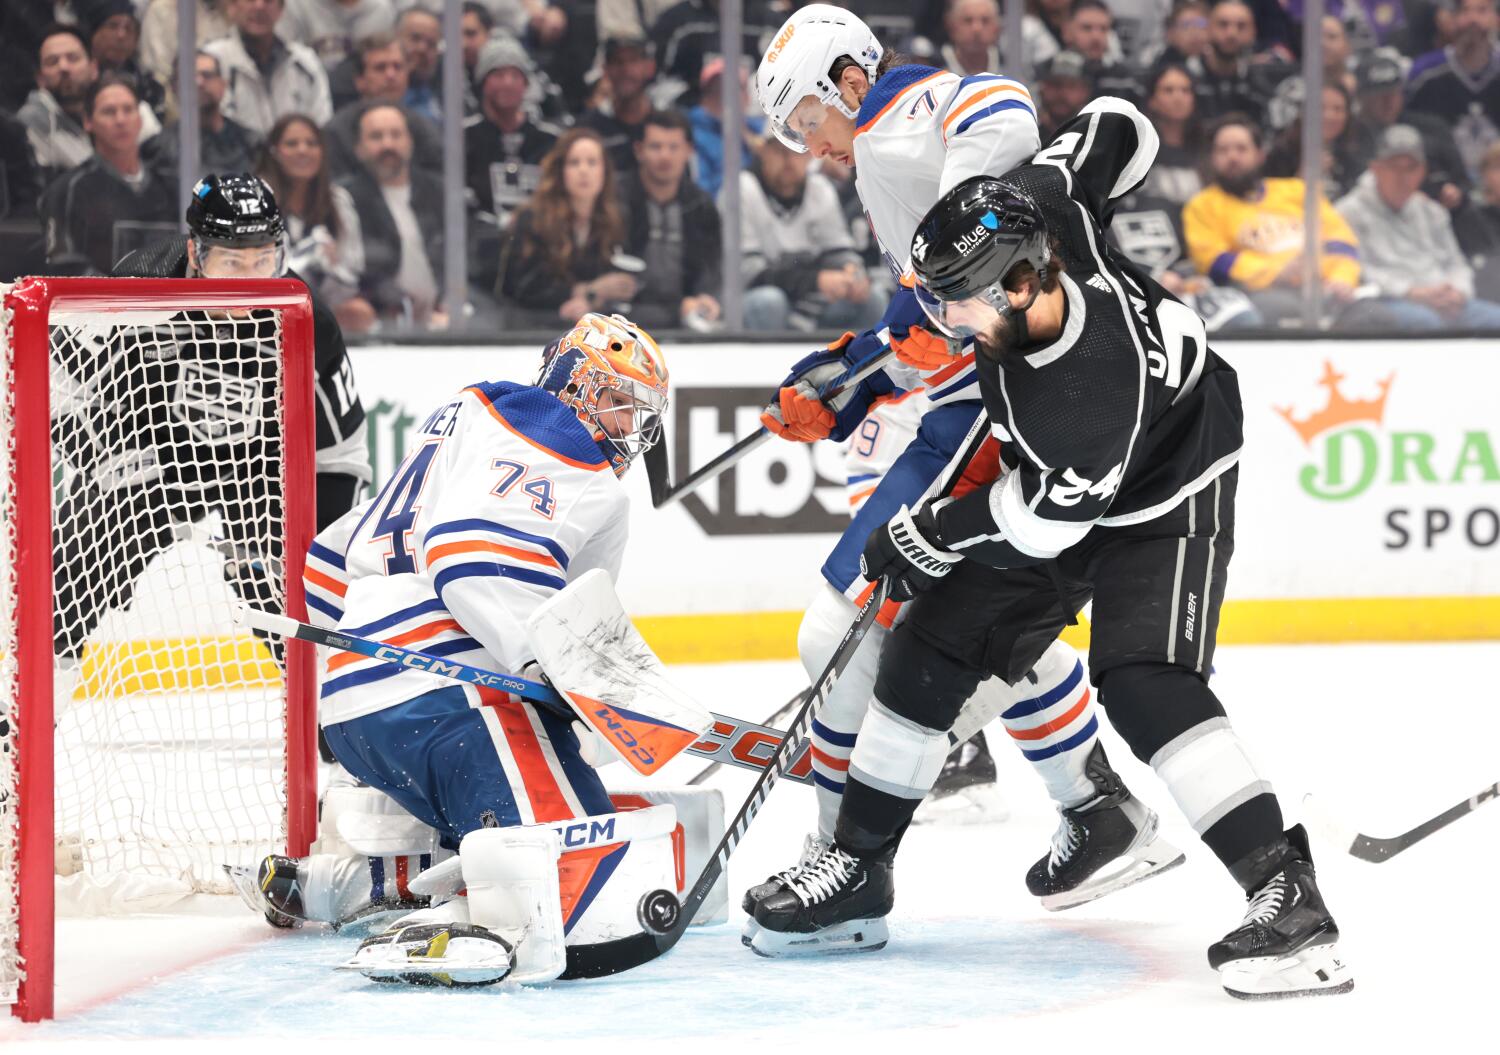 'We're not out of it': Kings look to even Oilers series in Game 4